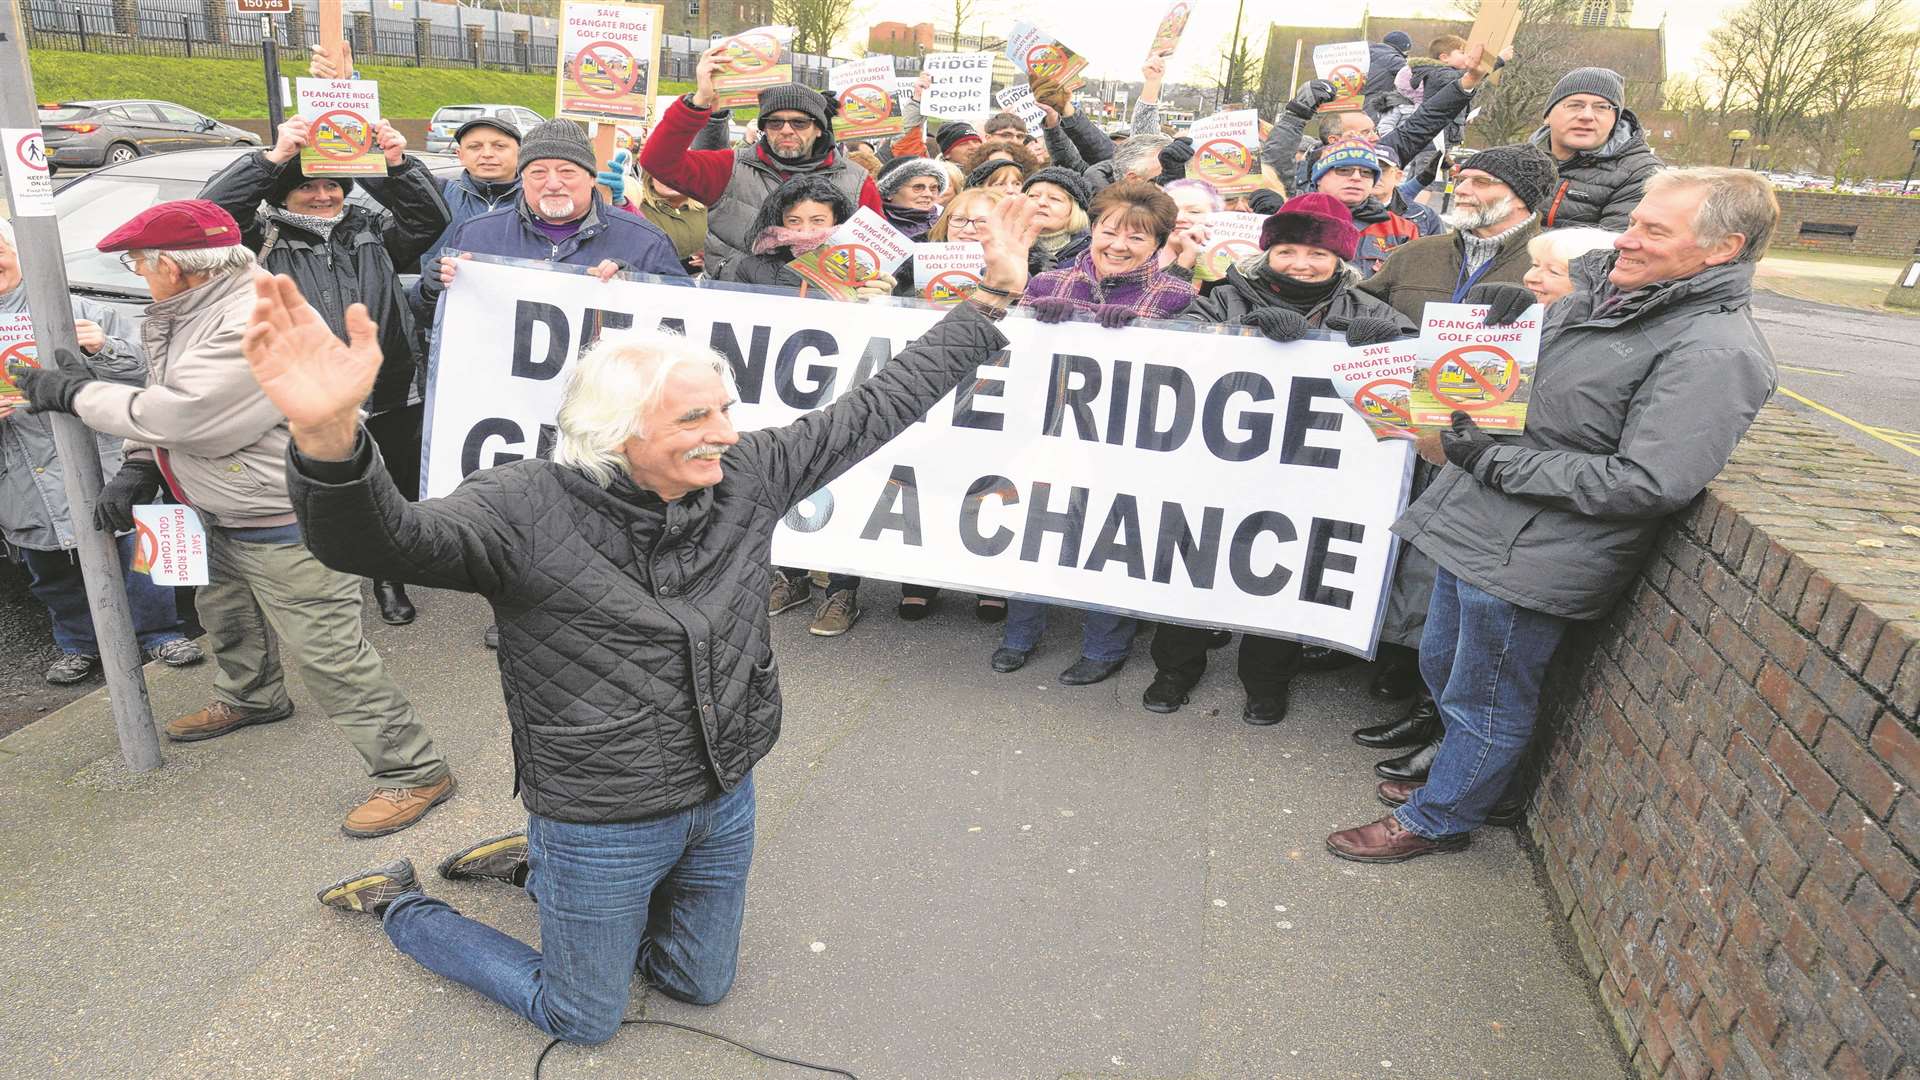 Chair of High Halstow parish council, George Crozer leads the protest against the closure of Deangate Ridge Golf Course outside the Medway Council offices in Gun Wharf. Picture: Chris Davey